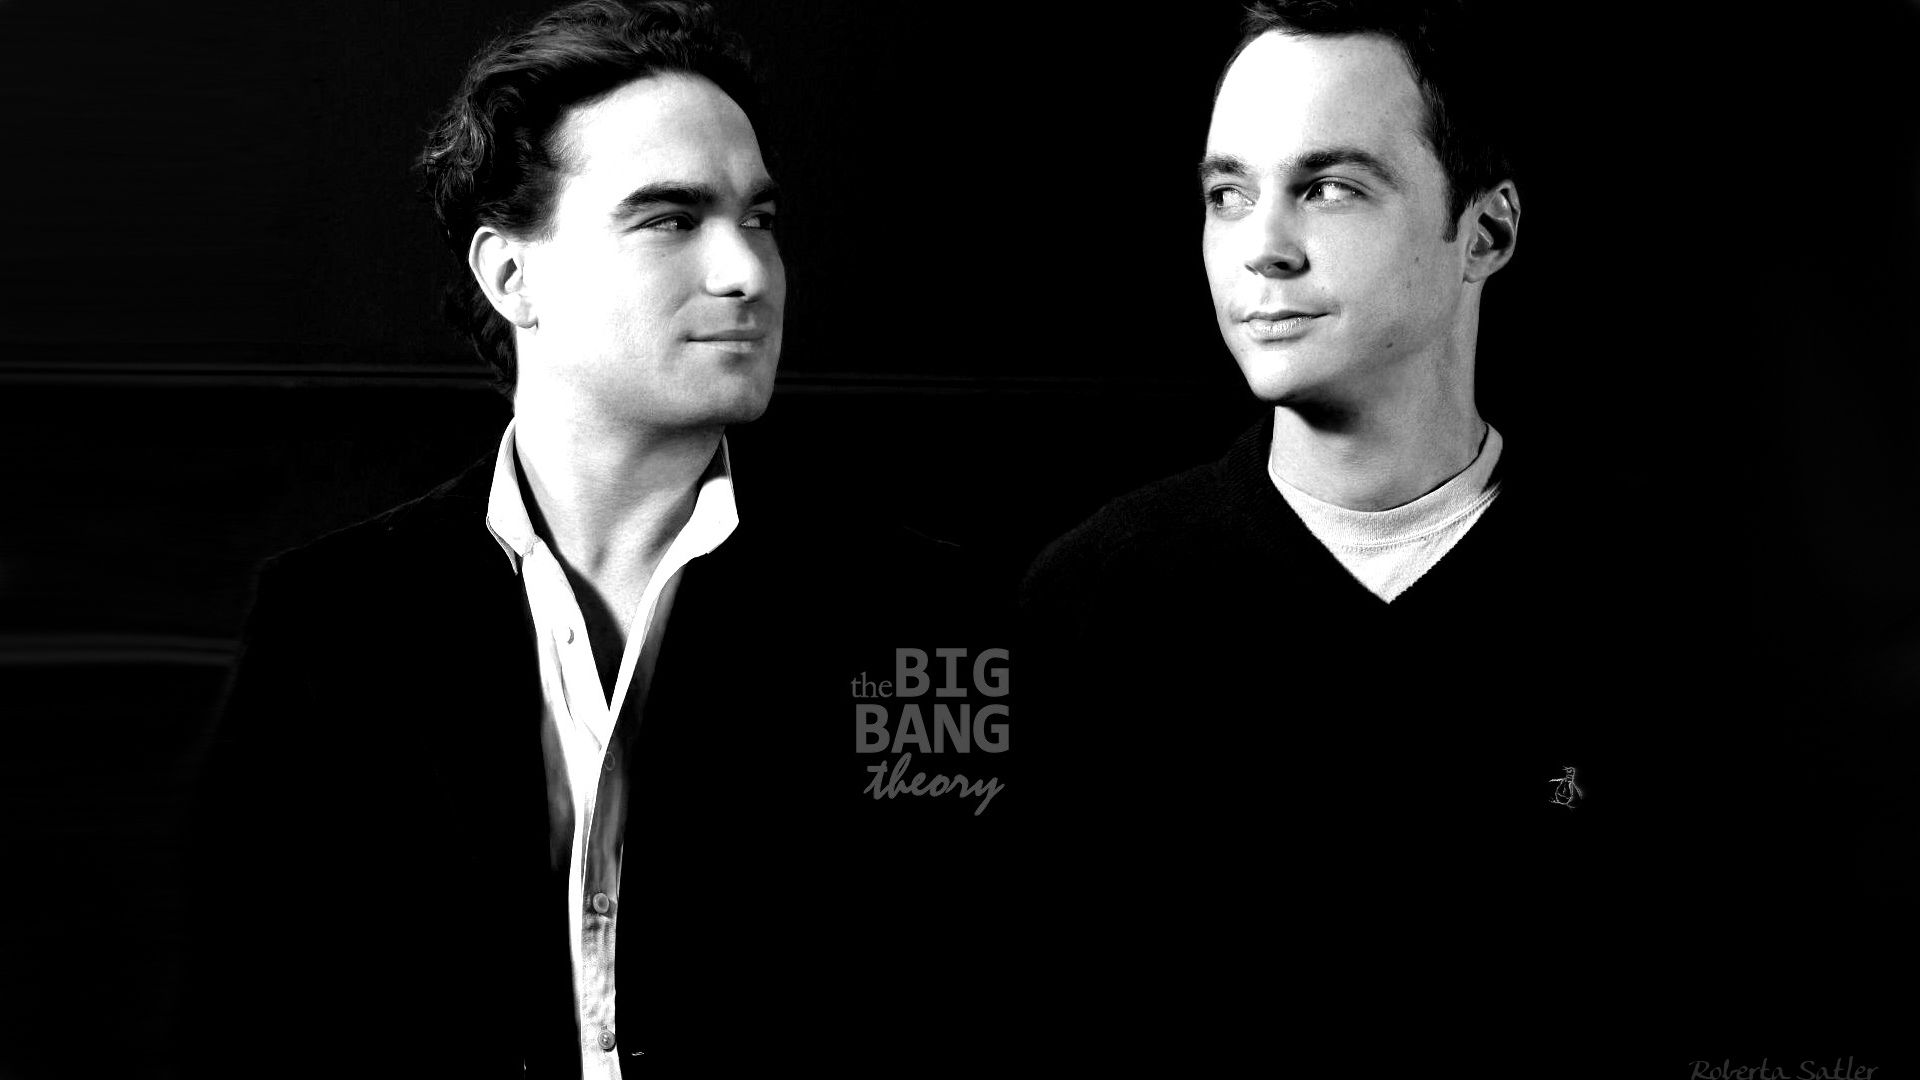 Big Bang Theory Photos Here Are Some HD